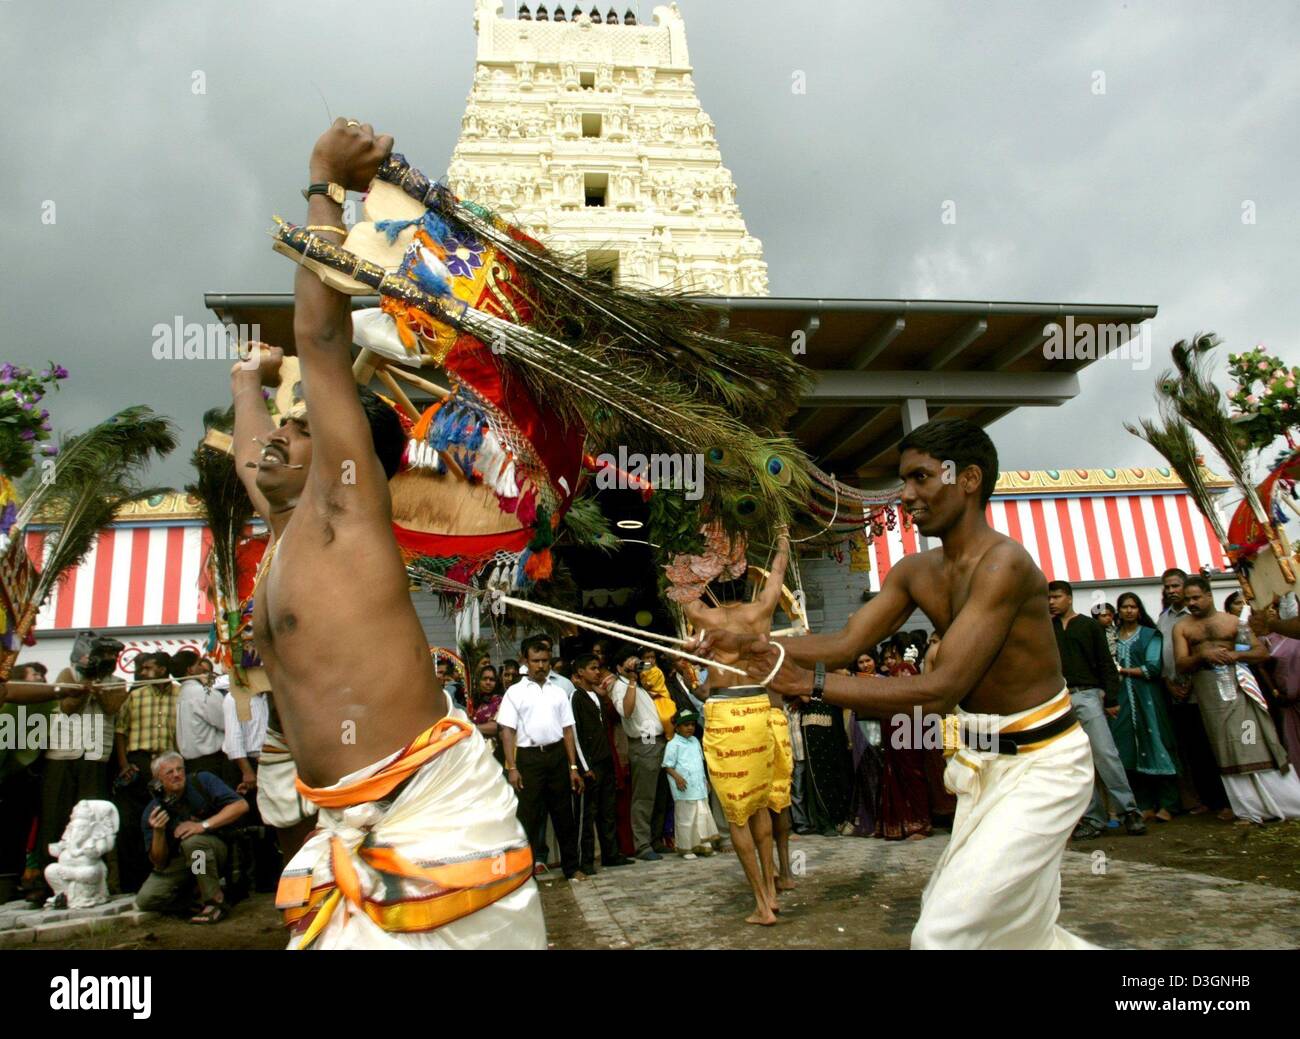 (dpa) - Devoted Hindus with iron hooks drilled into the skin on their backs dance during a traditional procession of about 15,000 believers near a temple in Hamm, Germany, 6  June 2004. The annual procession at the Sri Kamadchi Ampal Temple is one of the largest religious events for Tamil Hindus in Europe. Stock Photo